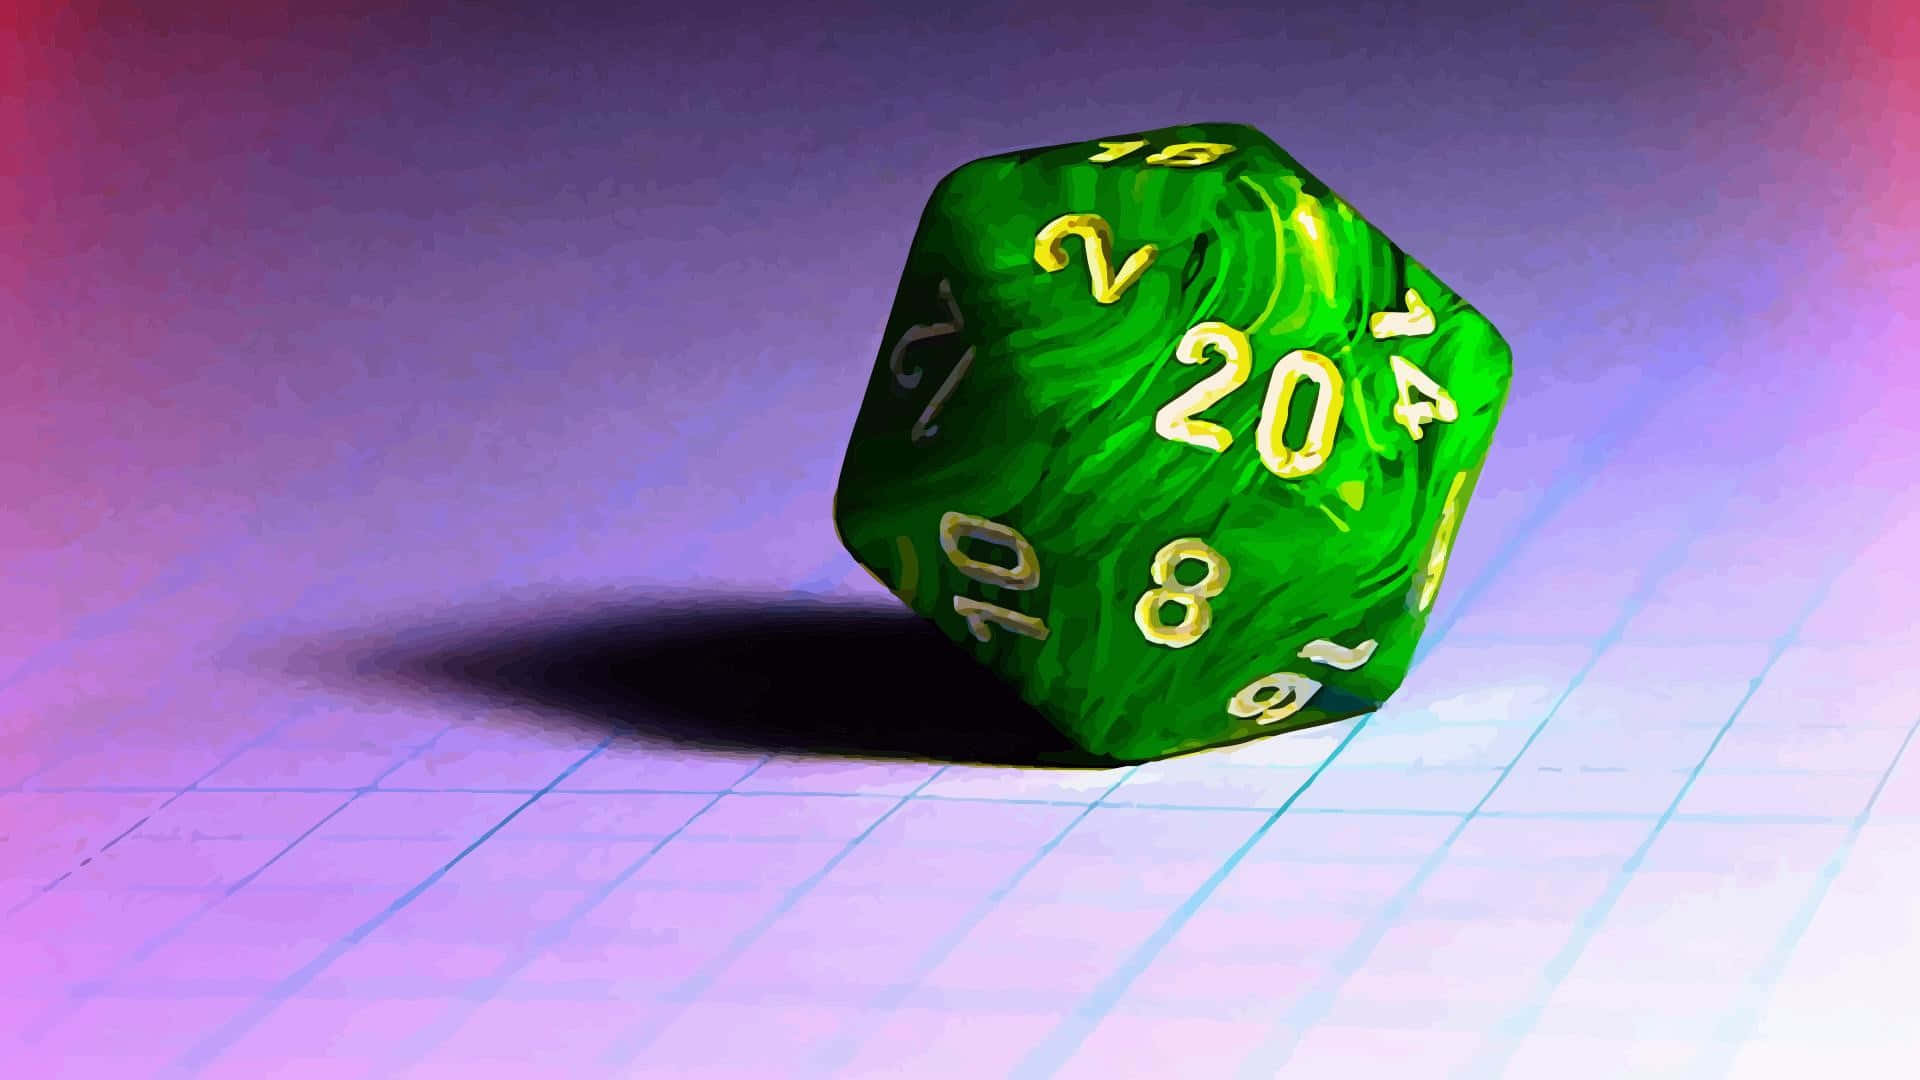 Vibrant D20 Dice on a Black Background Wallpaper